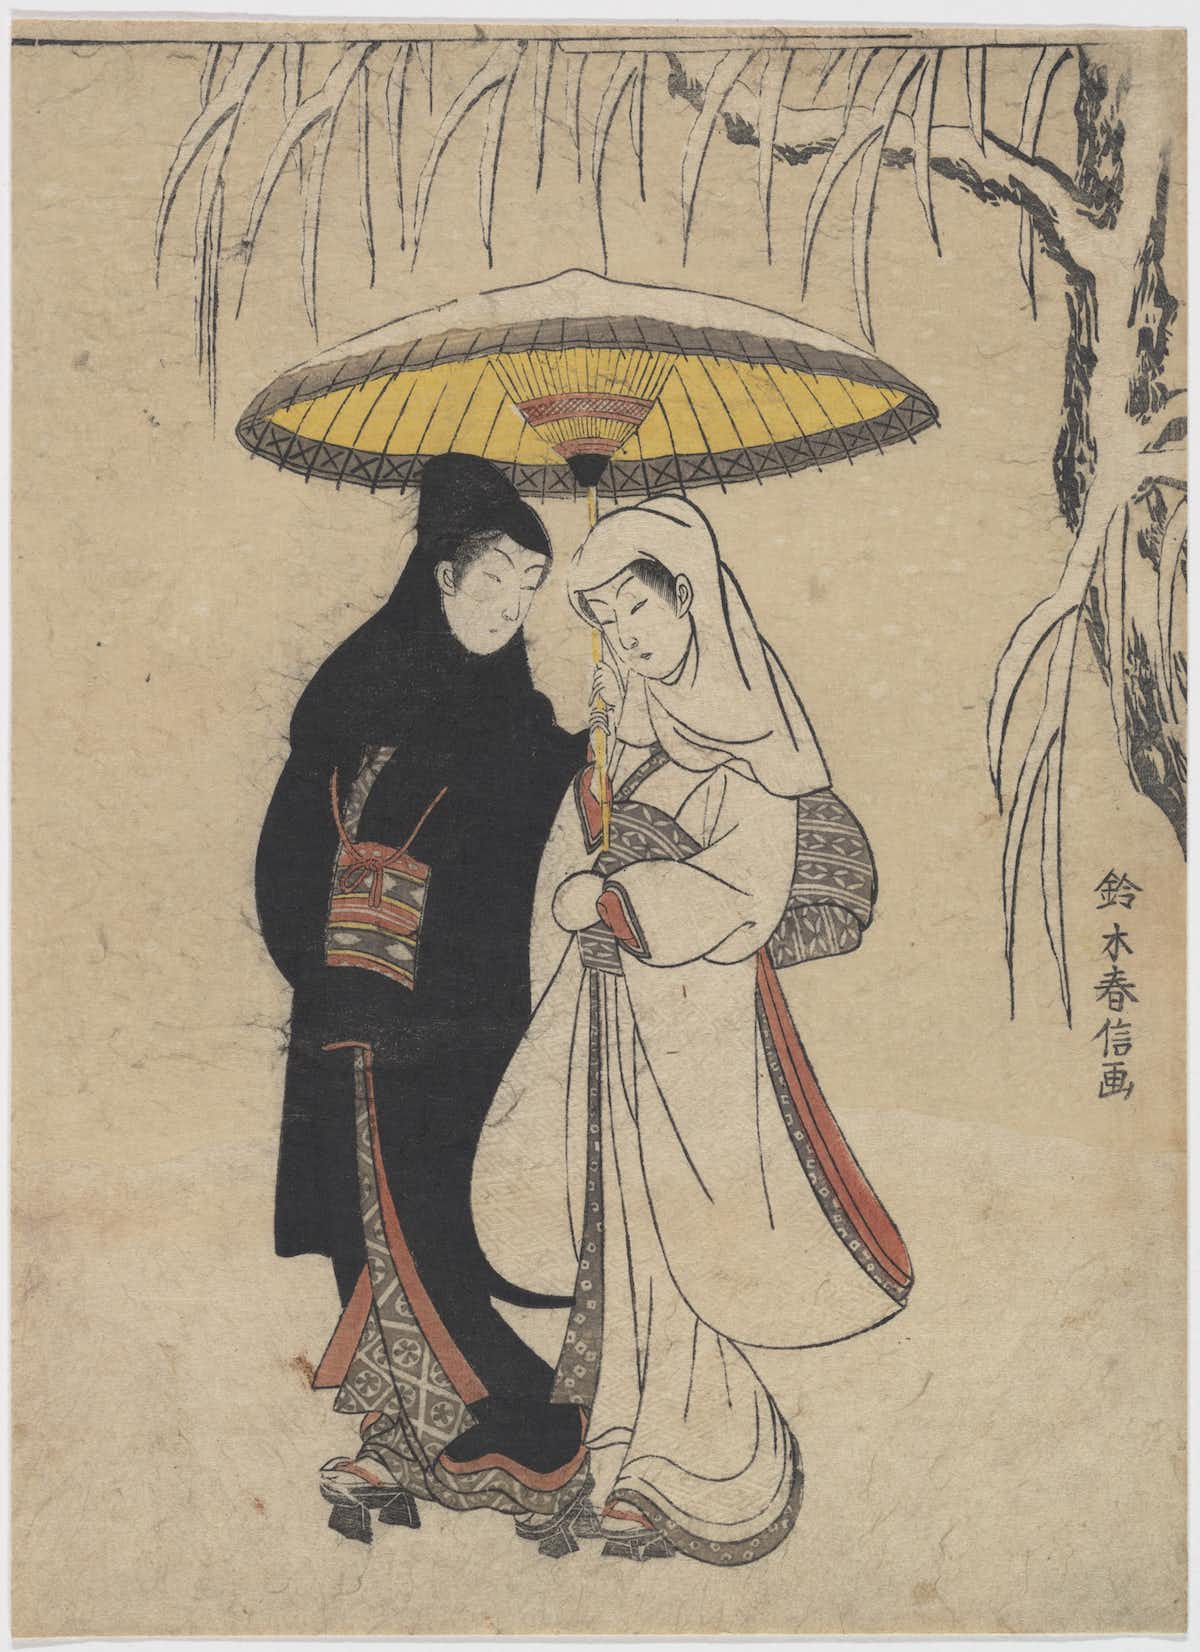 Young Lovers Walking Together under an Umbrella in a Snow Storm (Crow and Heron) by Suzuki Harunobu (c. 1769). : The Met